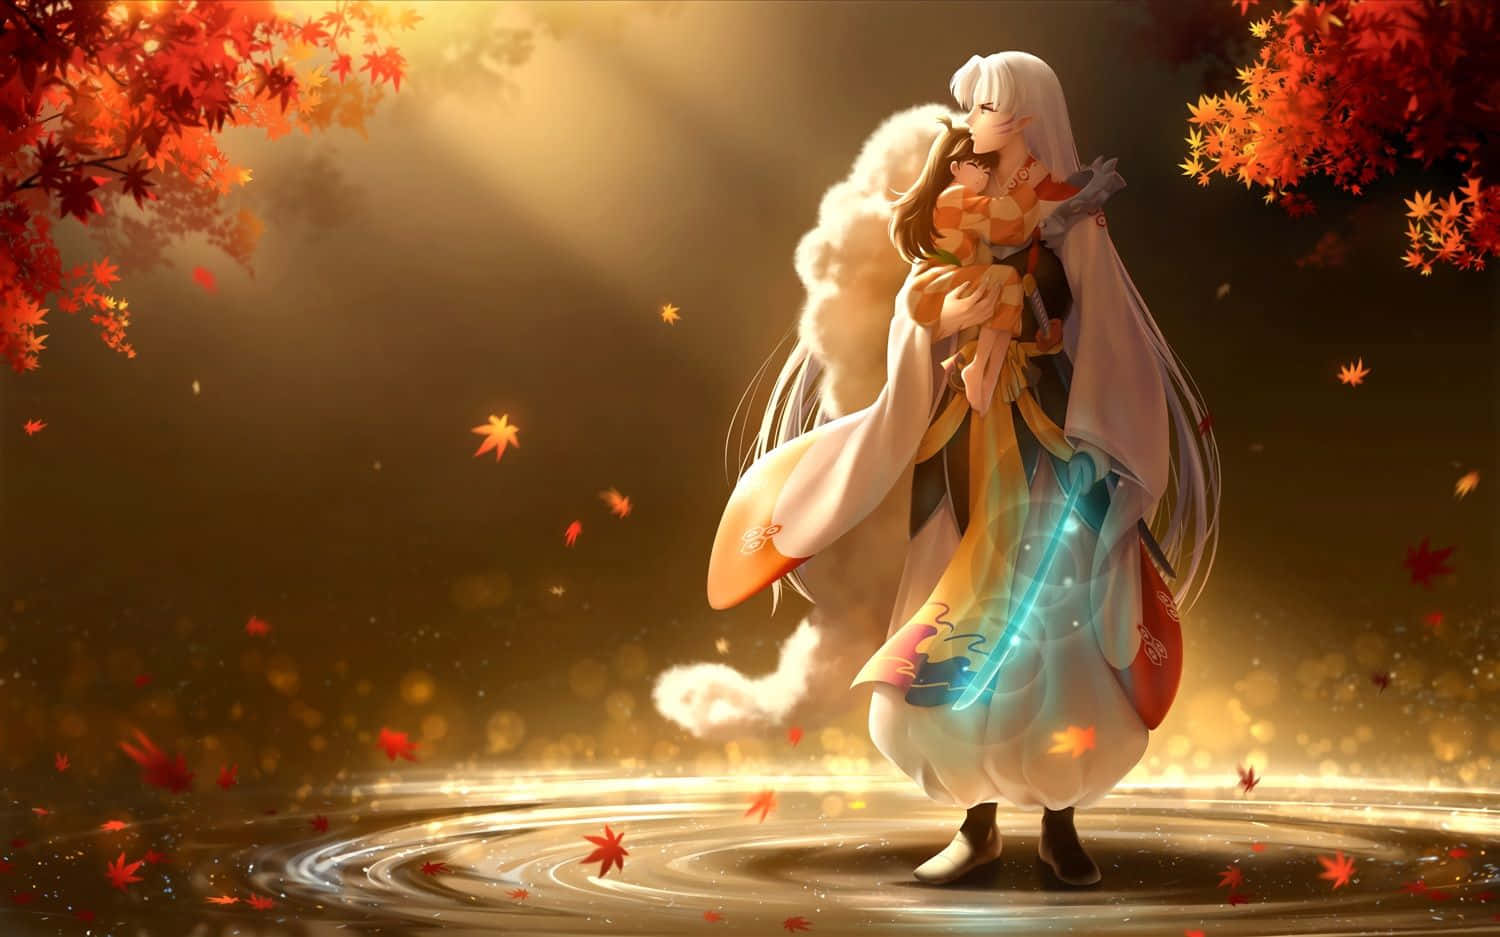 Inuyasha and Sesshomaru, powerful half-brothers from the anime world, stand side-by-side. Wallpaper